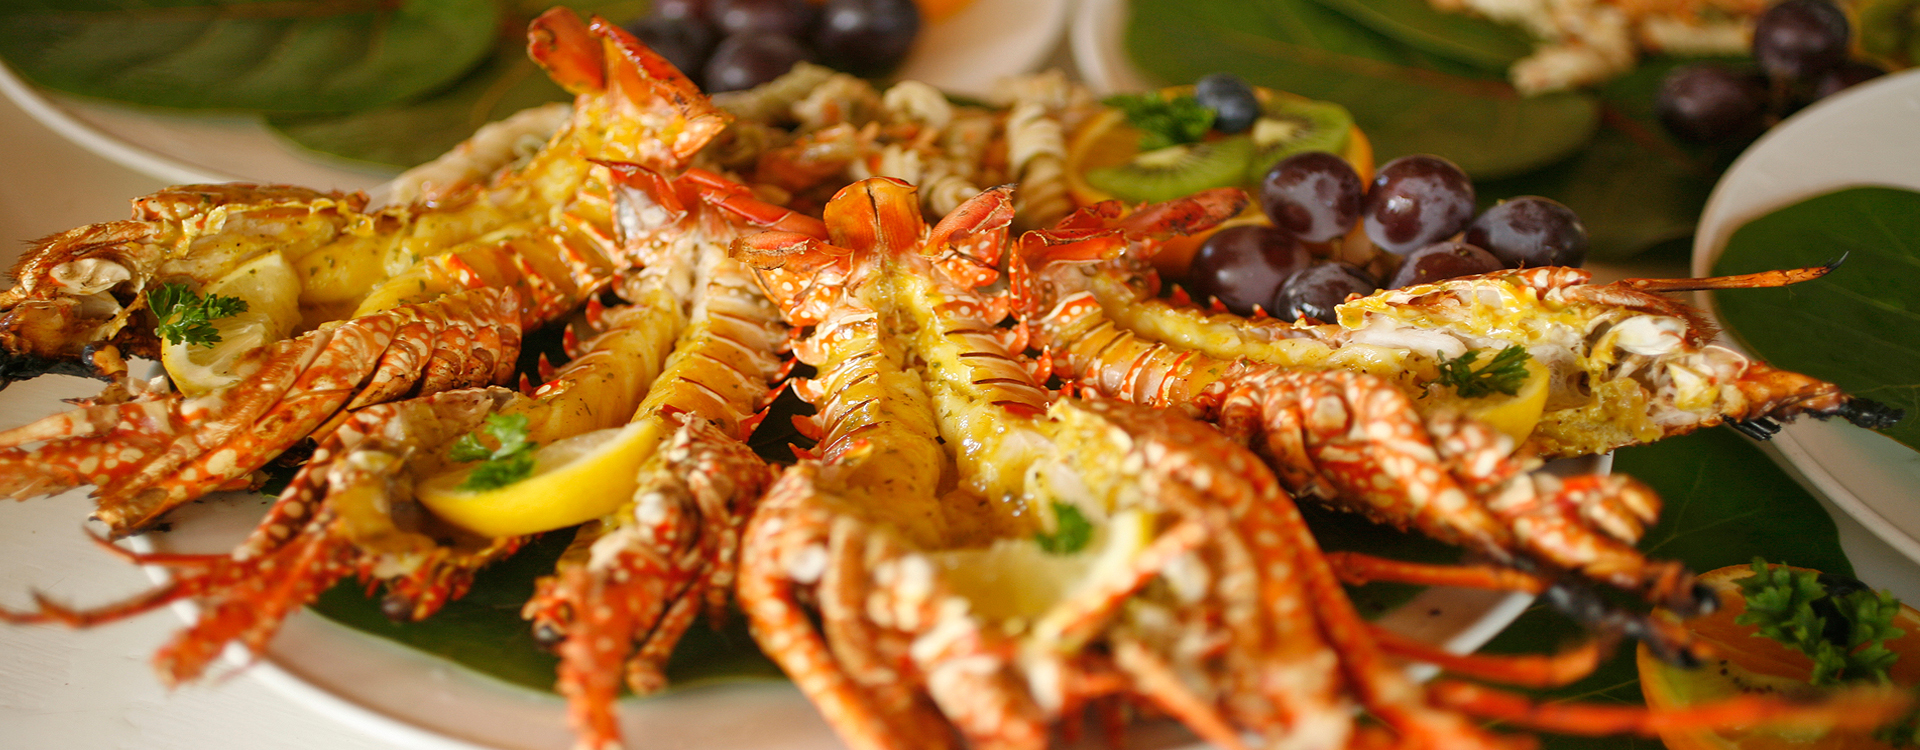 Cerulean serves fresh caught Anguilla seafood.            